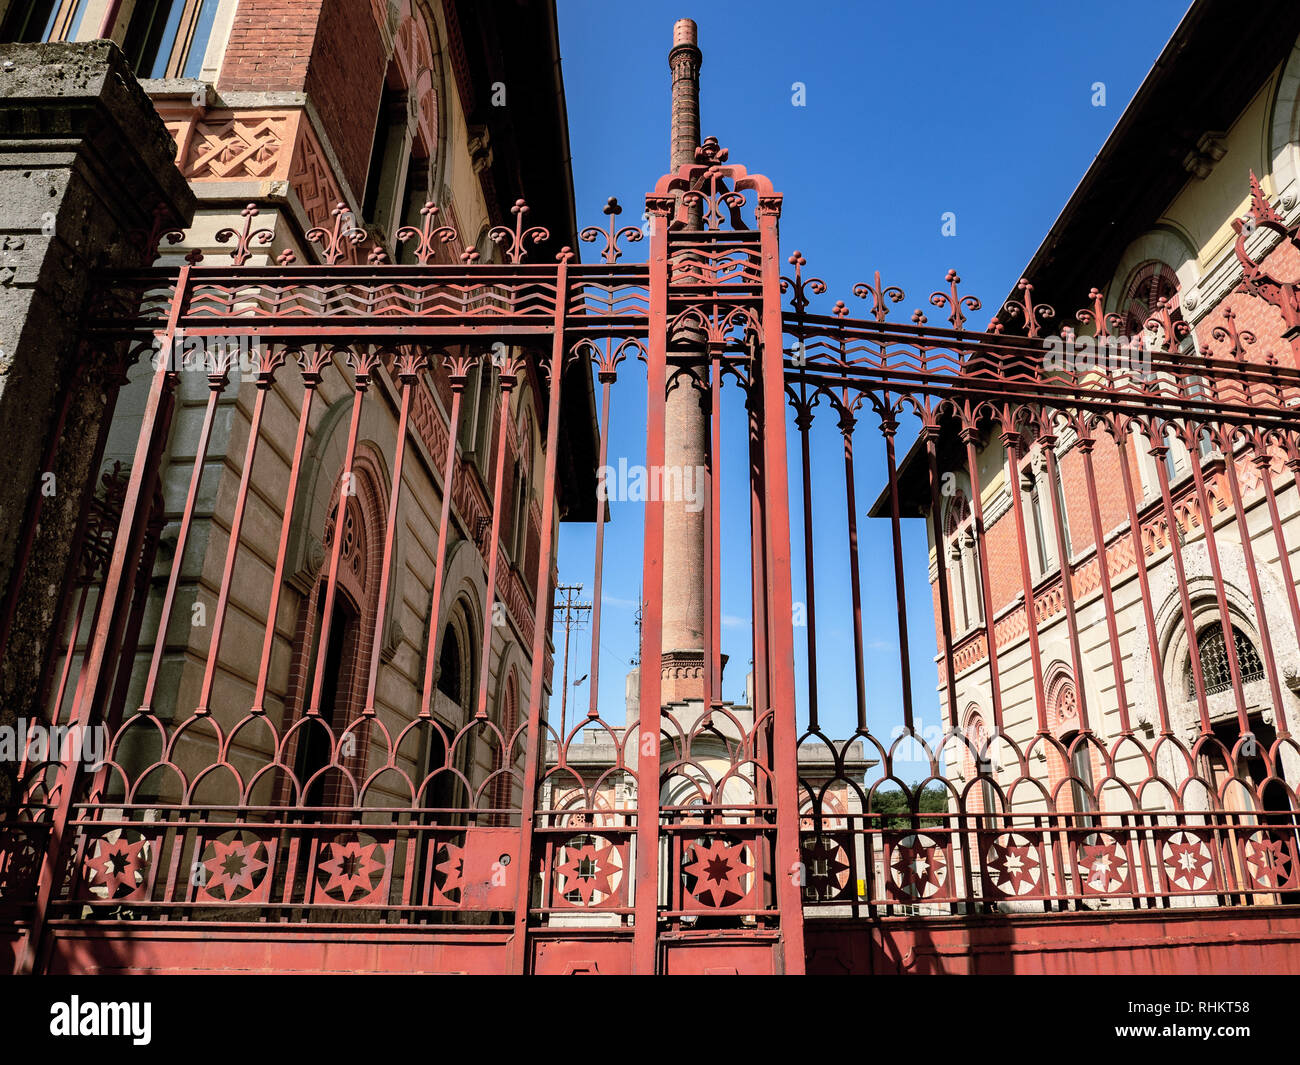 crespi d'adda - Lombardy, heritage of humanity. entrance to the factory, administrative offices and brick chimney. Stock Photo